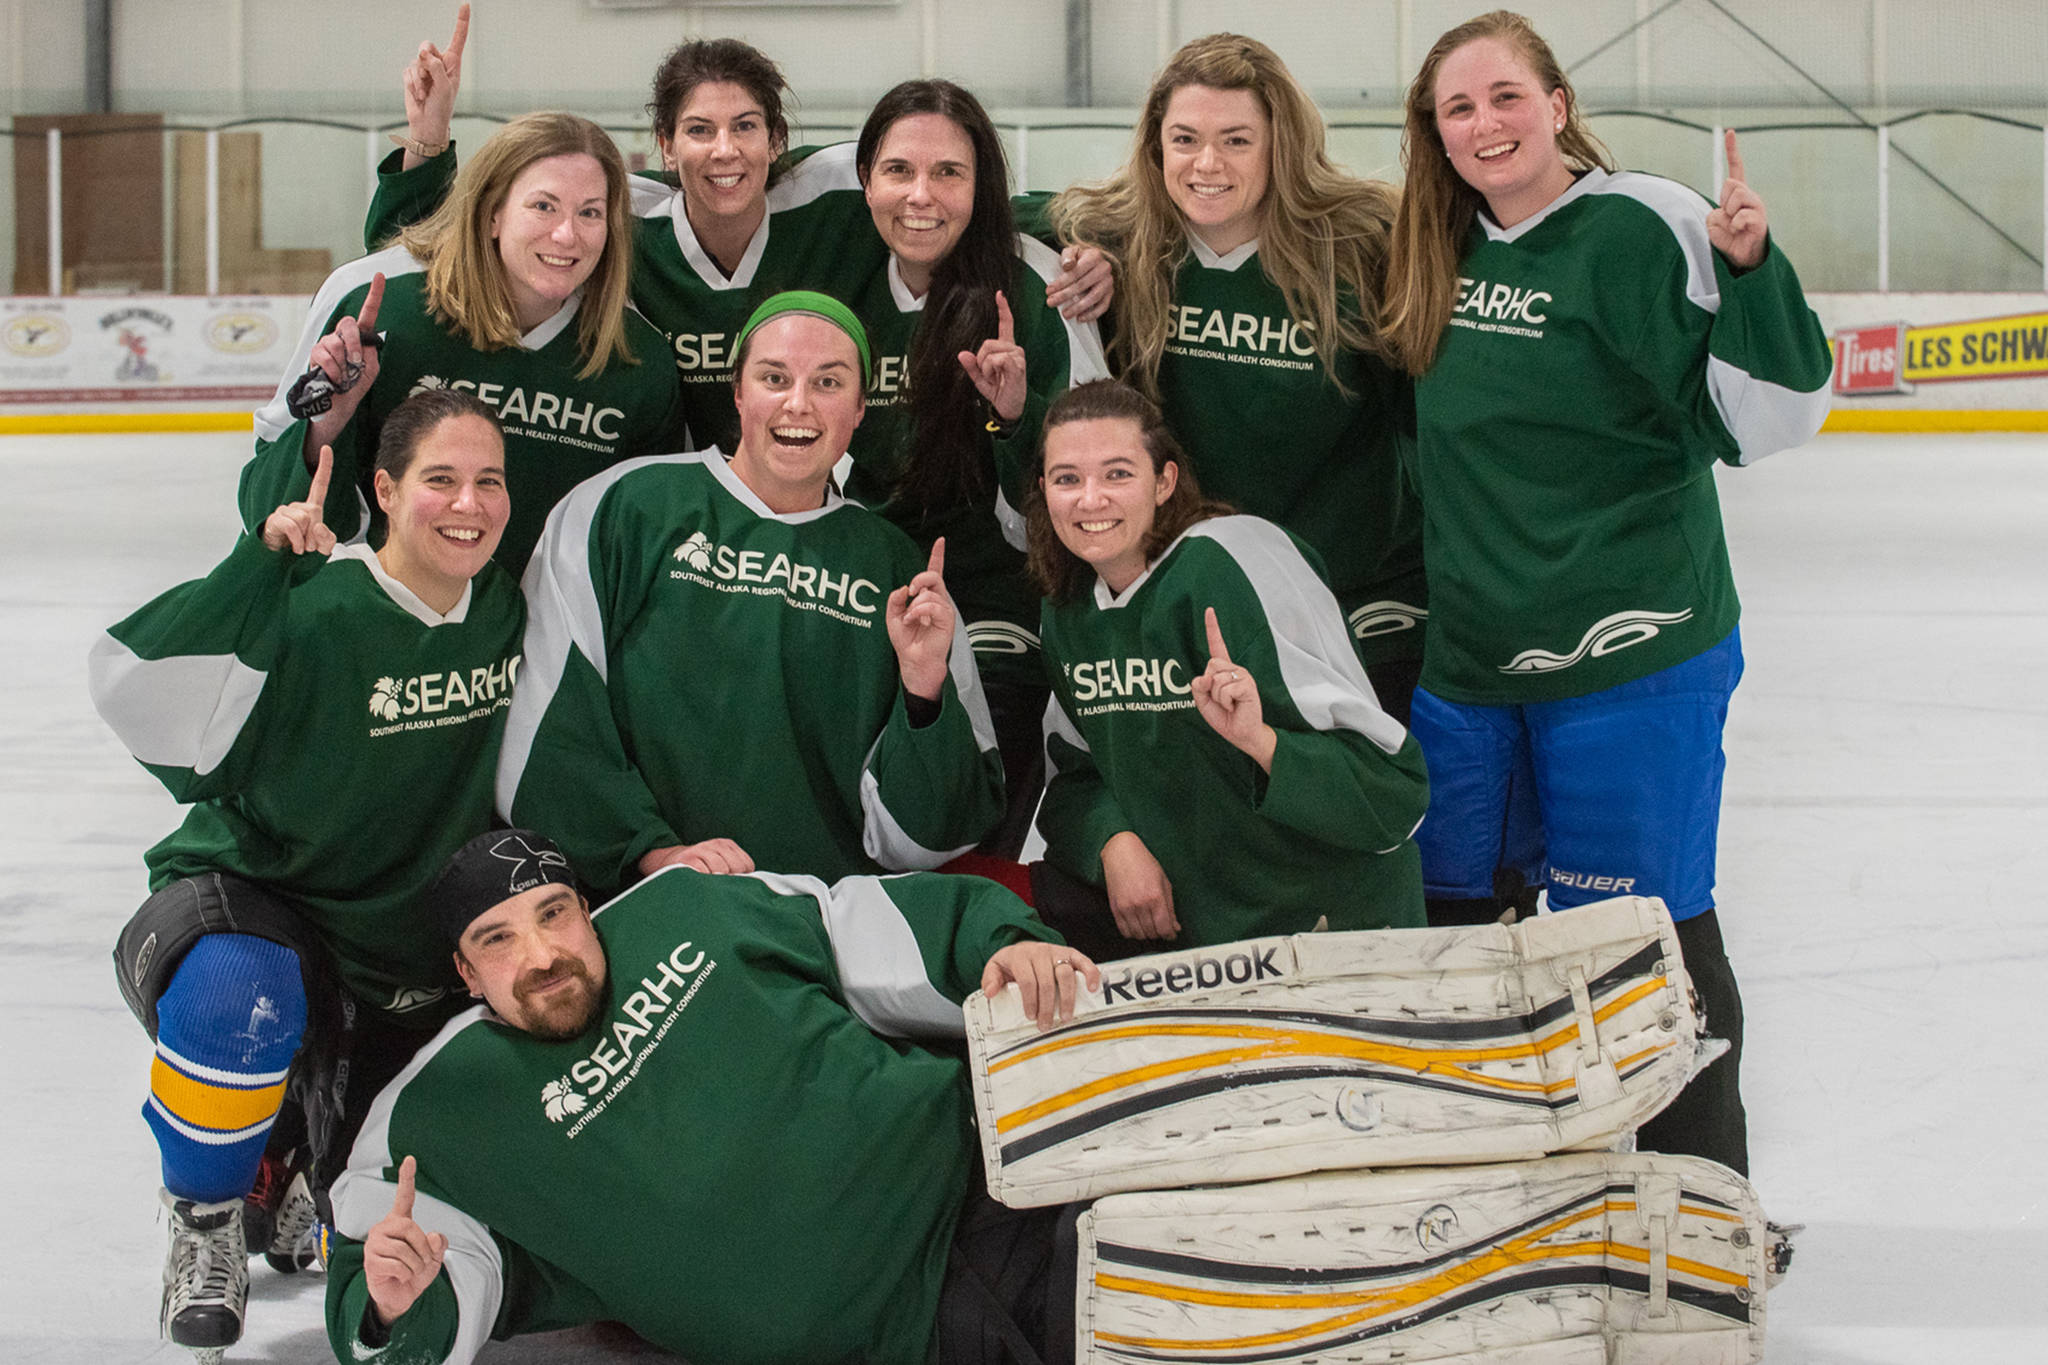 The JAHA Women’s Tier fall champions Eagle Beach pose for a photo after defeating HECLA Greens Creek 4-1 in the title game Sunday at Treadwell Arena. Eagle Beach players (not in order pictured): Amber LeBlanc, Ana Enge, Becca Parks, Brian McHenry, Carole Baker, Claire Baldwin, Emily Russo Miller, Kath Hansen, Laurel Shoop, Michele Drummond, Morgan Ramseth, Selena Higgins. (Courtesy Photo | Claire Baldwin)